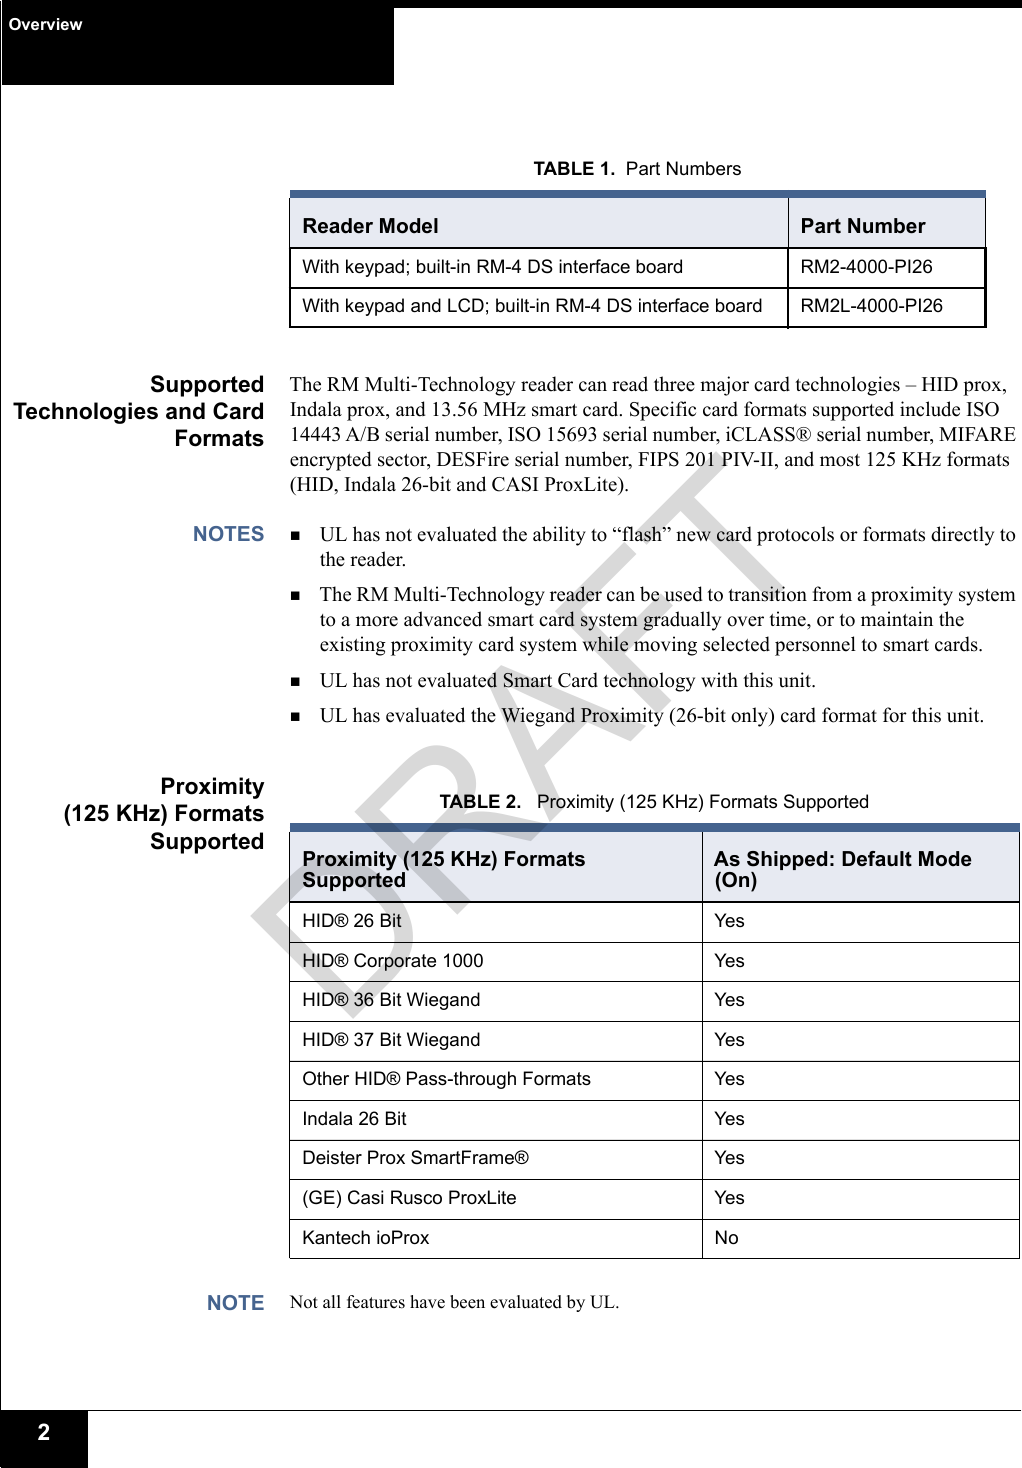 Overview2SupportedTechnologies and CardFormatsThe RM Multi-Technology reader can read three major card technologies – HID prox, Indala prox, and 13.56 MHz smart card. Specific card formats supported include ISO 14443 A/B serial number, ISO 15693 serial number, iCLASS® serial number, MIFARE encrypted sector, DESFire serial number, FIPS 201 PIV-II, and most 125 KHz formats (HID, Indala 26-bit and CASI ProxLite).NOTES UL has not evaluated the ability to “flash” new card protocols or formats directly to the reader. The RM Multi-Technology reader can be used to transition from a proximity system to a more advanced smart card system gradually over time, or to maintain the existing proximity card system while moving selected personnel to smart cards.UL has not evaluated Smart Card technology with this unit. UL has evaluated the Wiegand Proximity (26-bit only) card format for this unit.Proximity(125 KHz) FormatsSupportedNOTE Not all features have been evaluated by UL.TABLE 1.  Part NumbersReader Model Part NumberWith keypad; built-in RM-4 DS interface board RM2-4000-PI26With keypad and LCD; built-in RM-4 DS interface board RM2L-4000-PI26TABLE 2.   Proximity (125 KHz) Formats SupportedProximity (125 KHz) Formats SupportedAs Shipped: Default Mode (On)HID® 26 Bit  YesHID® Corporate 1000 YesHID® 36 Bit Wiegand YesHID® 37 Bit Wiegand YesOther HID® Pass-through Formats YesIndala 26 Bit YesDeister Prox SmartFrame® Yes(GE) Casi Rusco ProxLite  Yes Kantech ioProx No DRAFT